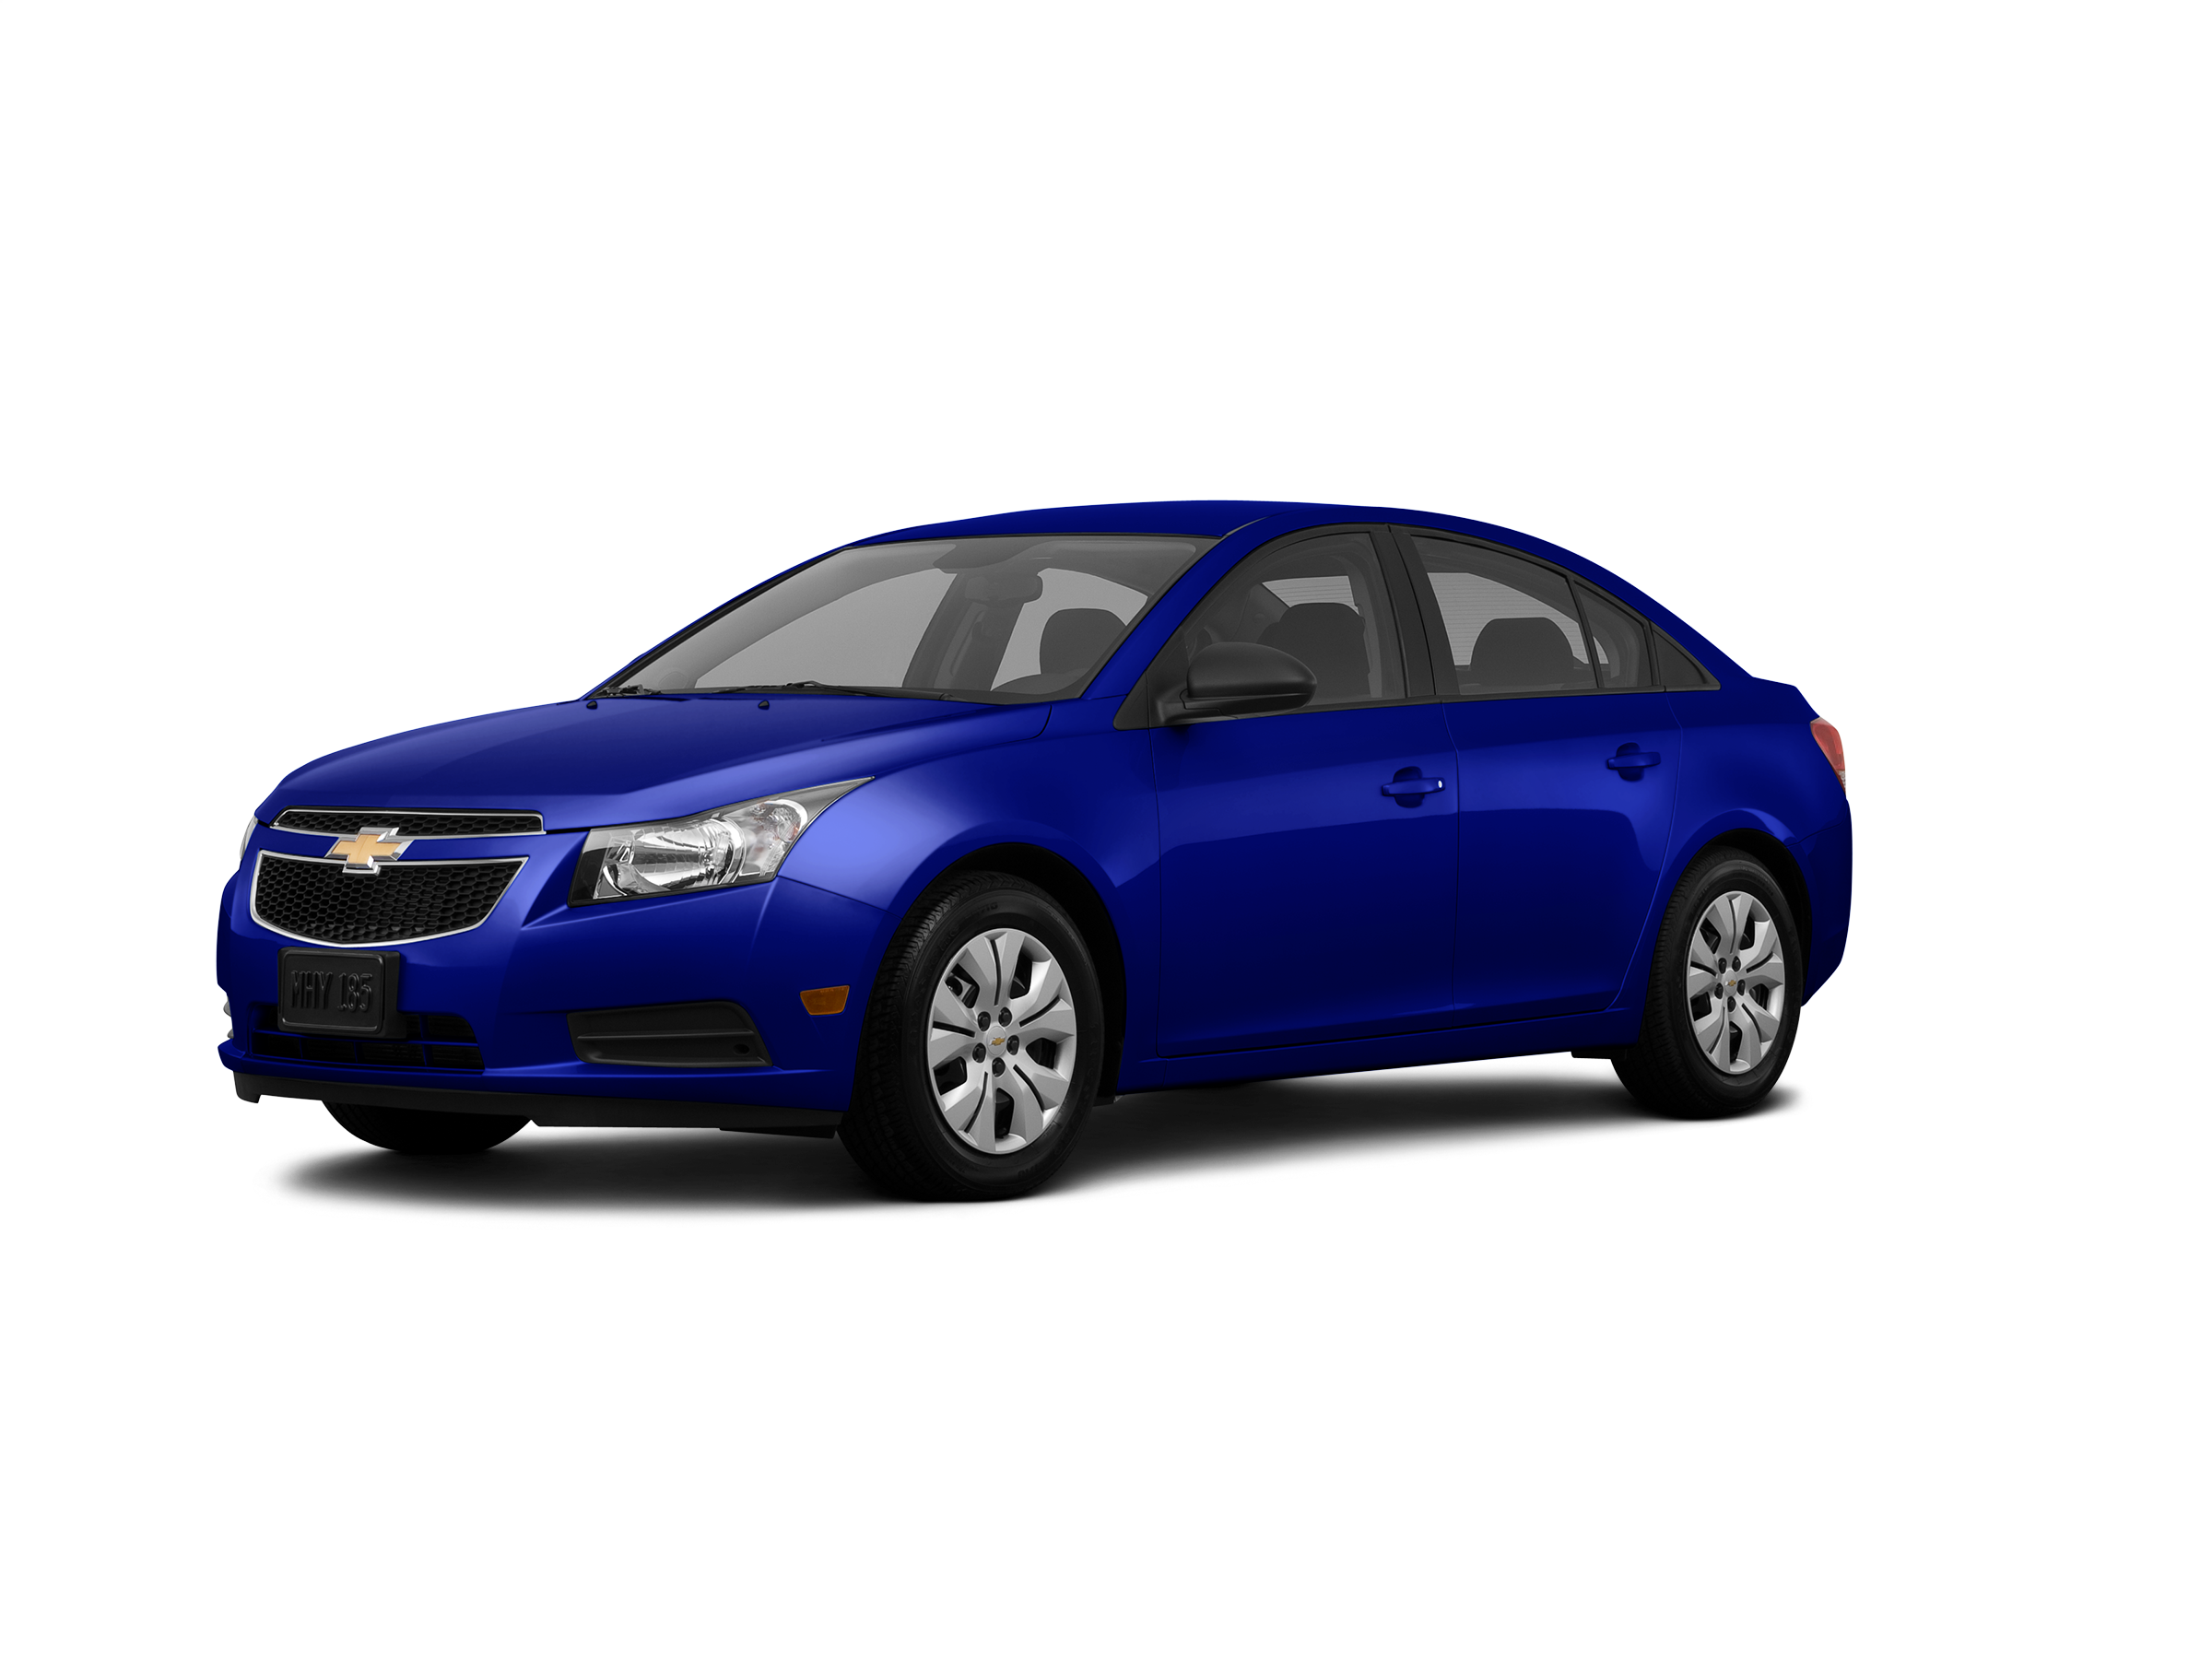 Chevrolet Cruze Station Wagon 2013  pictures information  specs